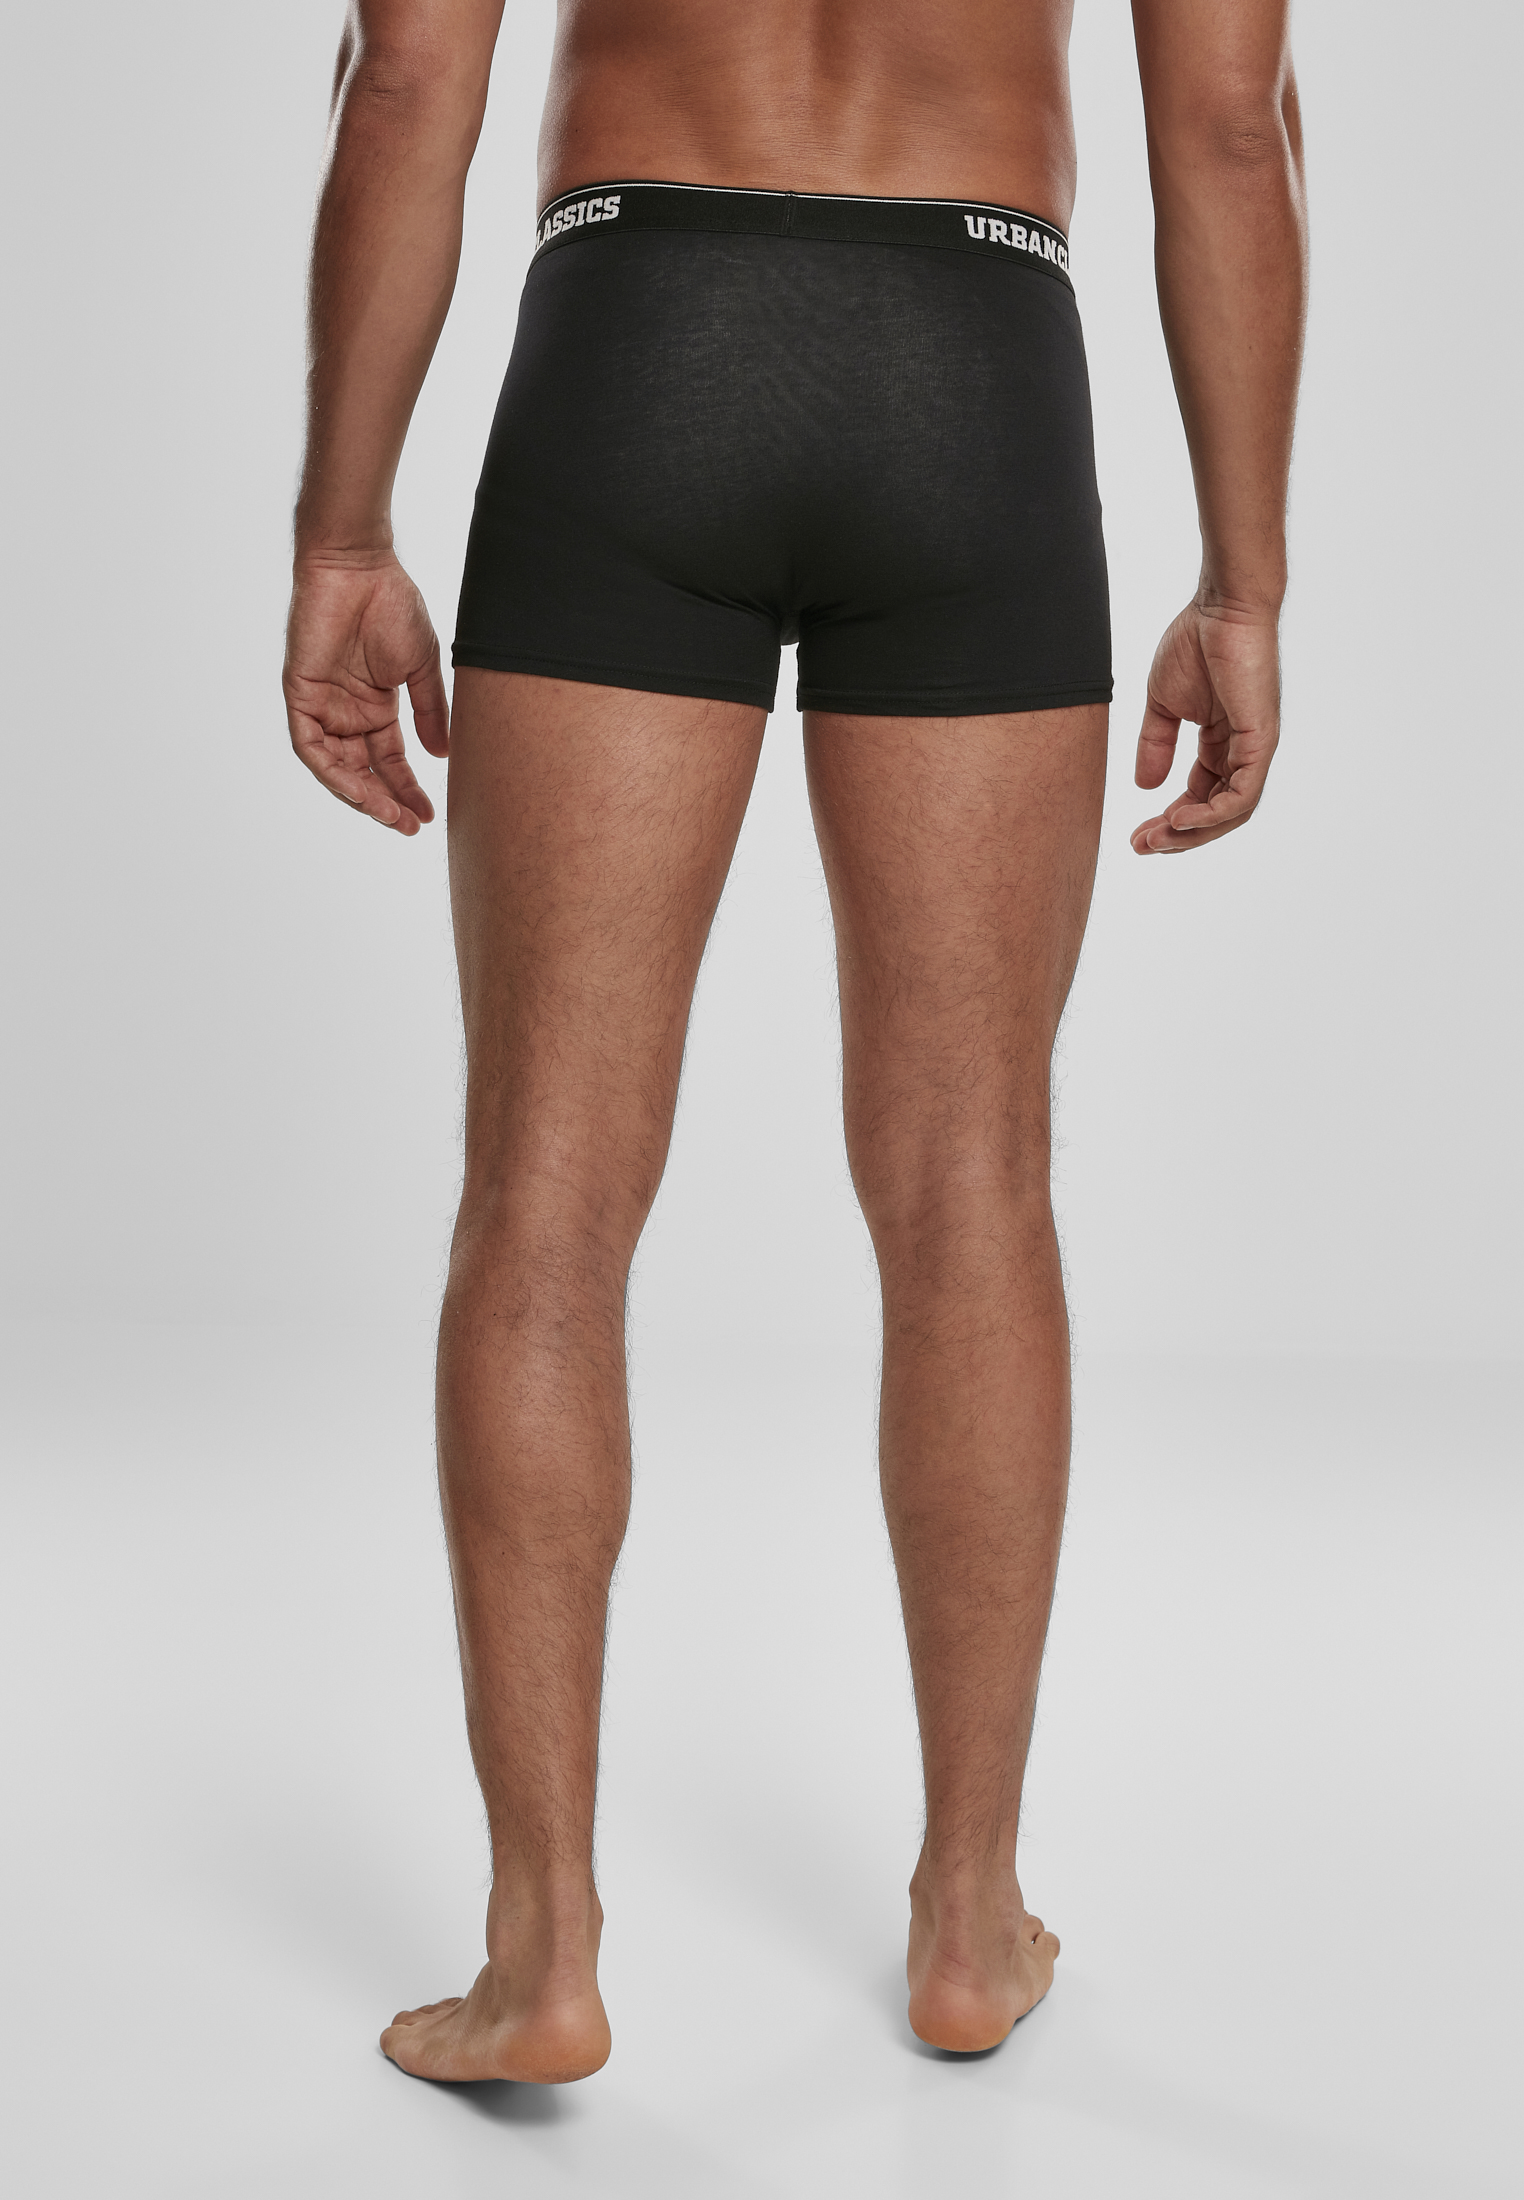 Should guys wear shorts over running tights? - Quora